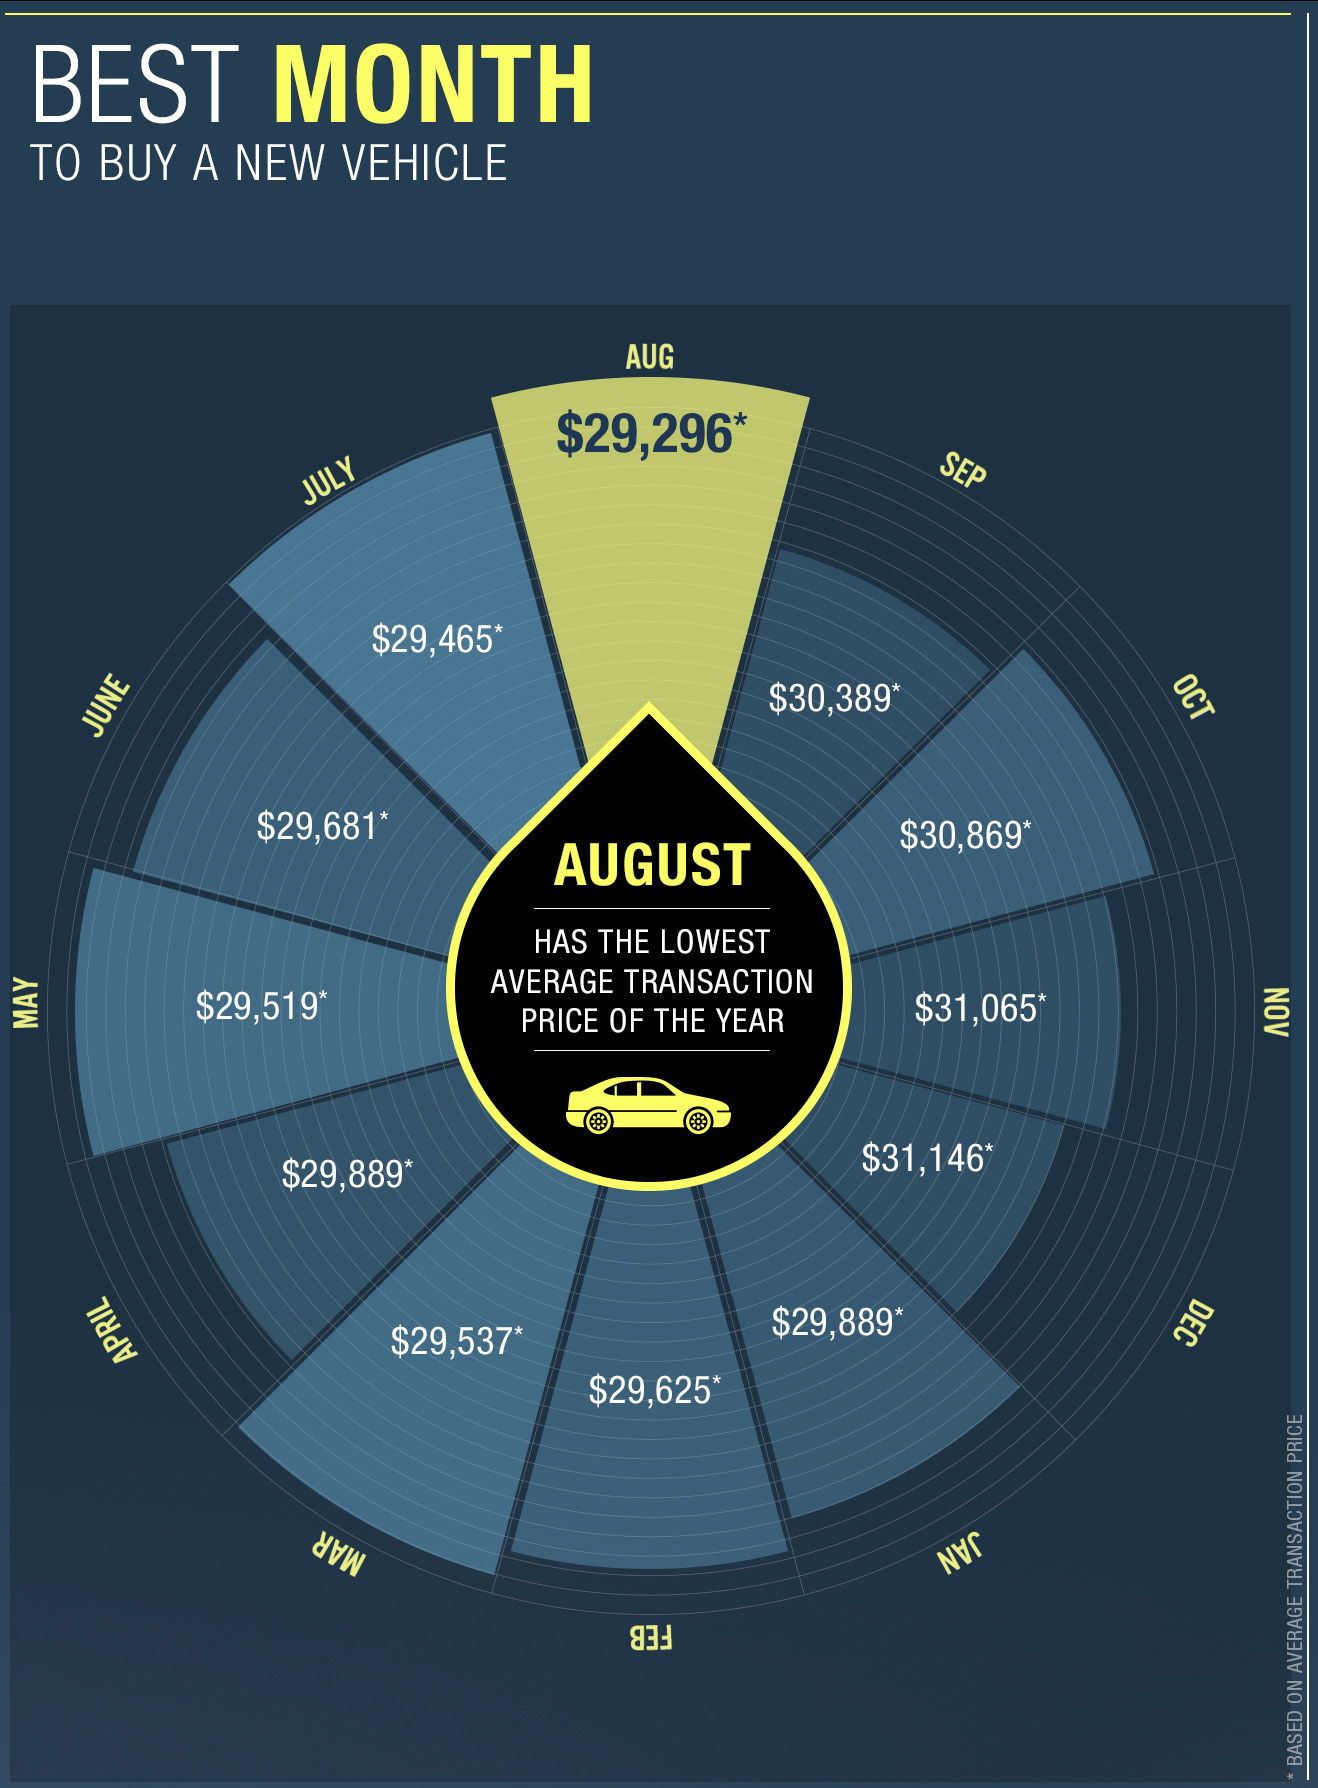 AUGUST IS THE BEST MONTH TO BUY A NEW CAR, ACCORDING TO TRUECAR